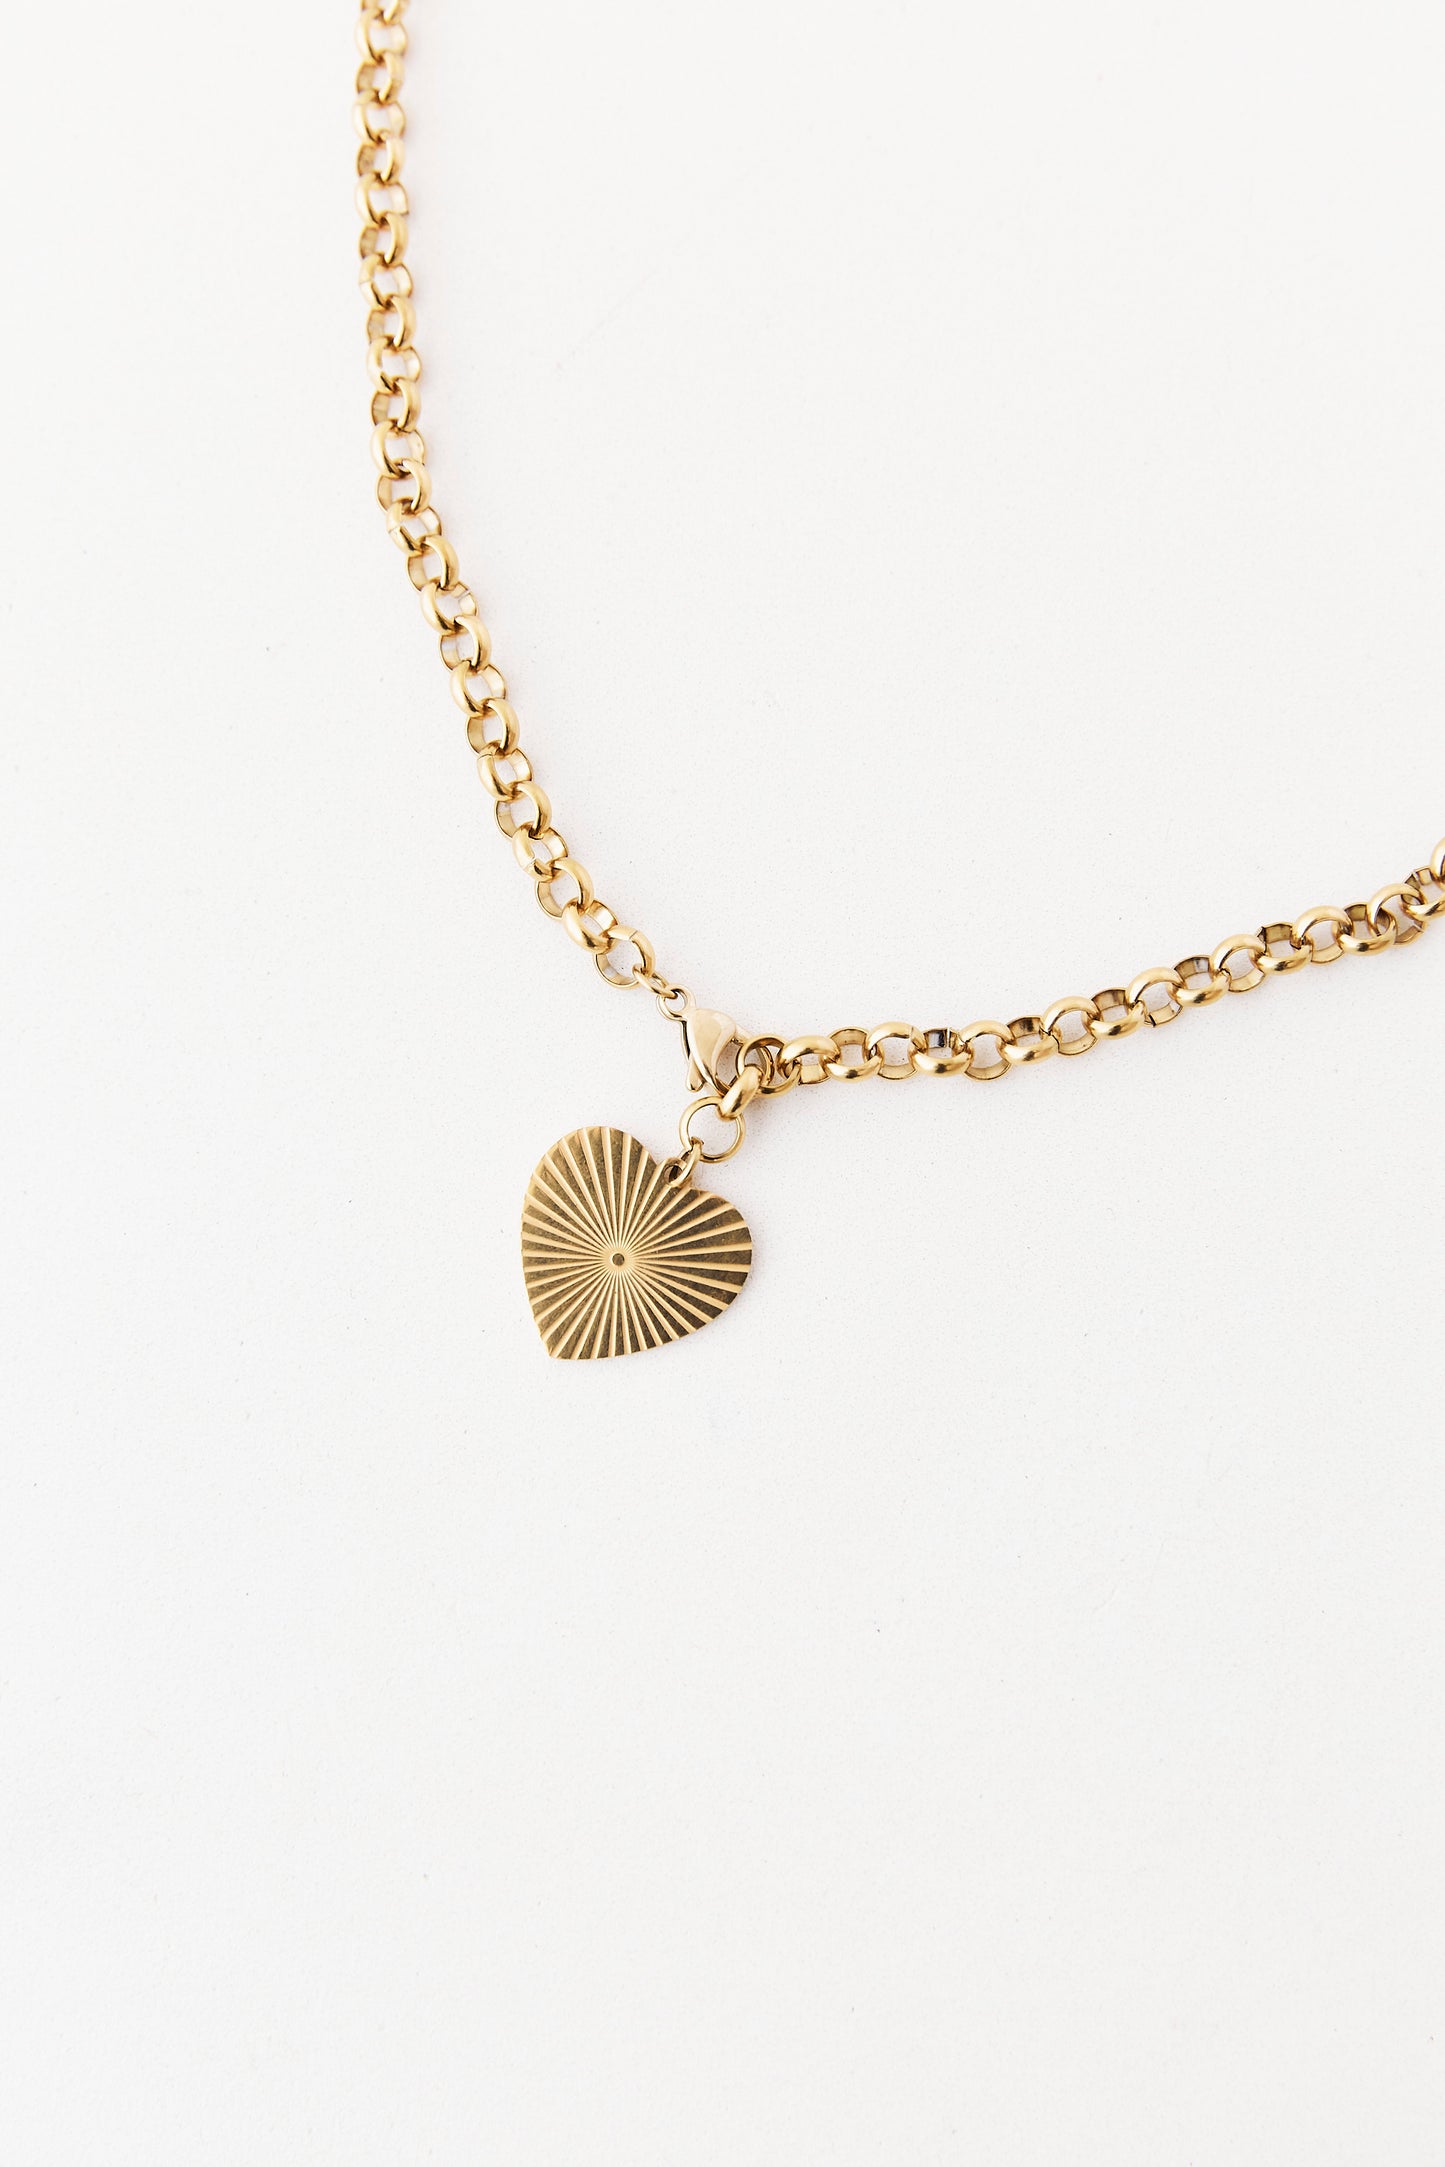 Jamie Gold Heart Charm Necklace